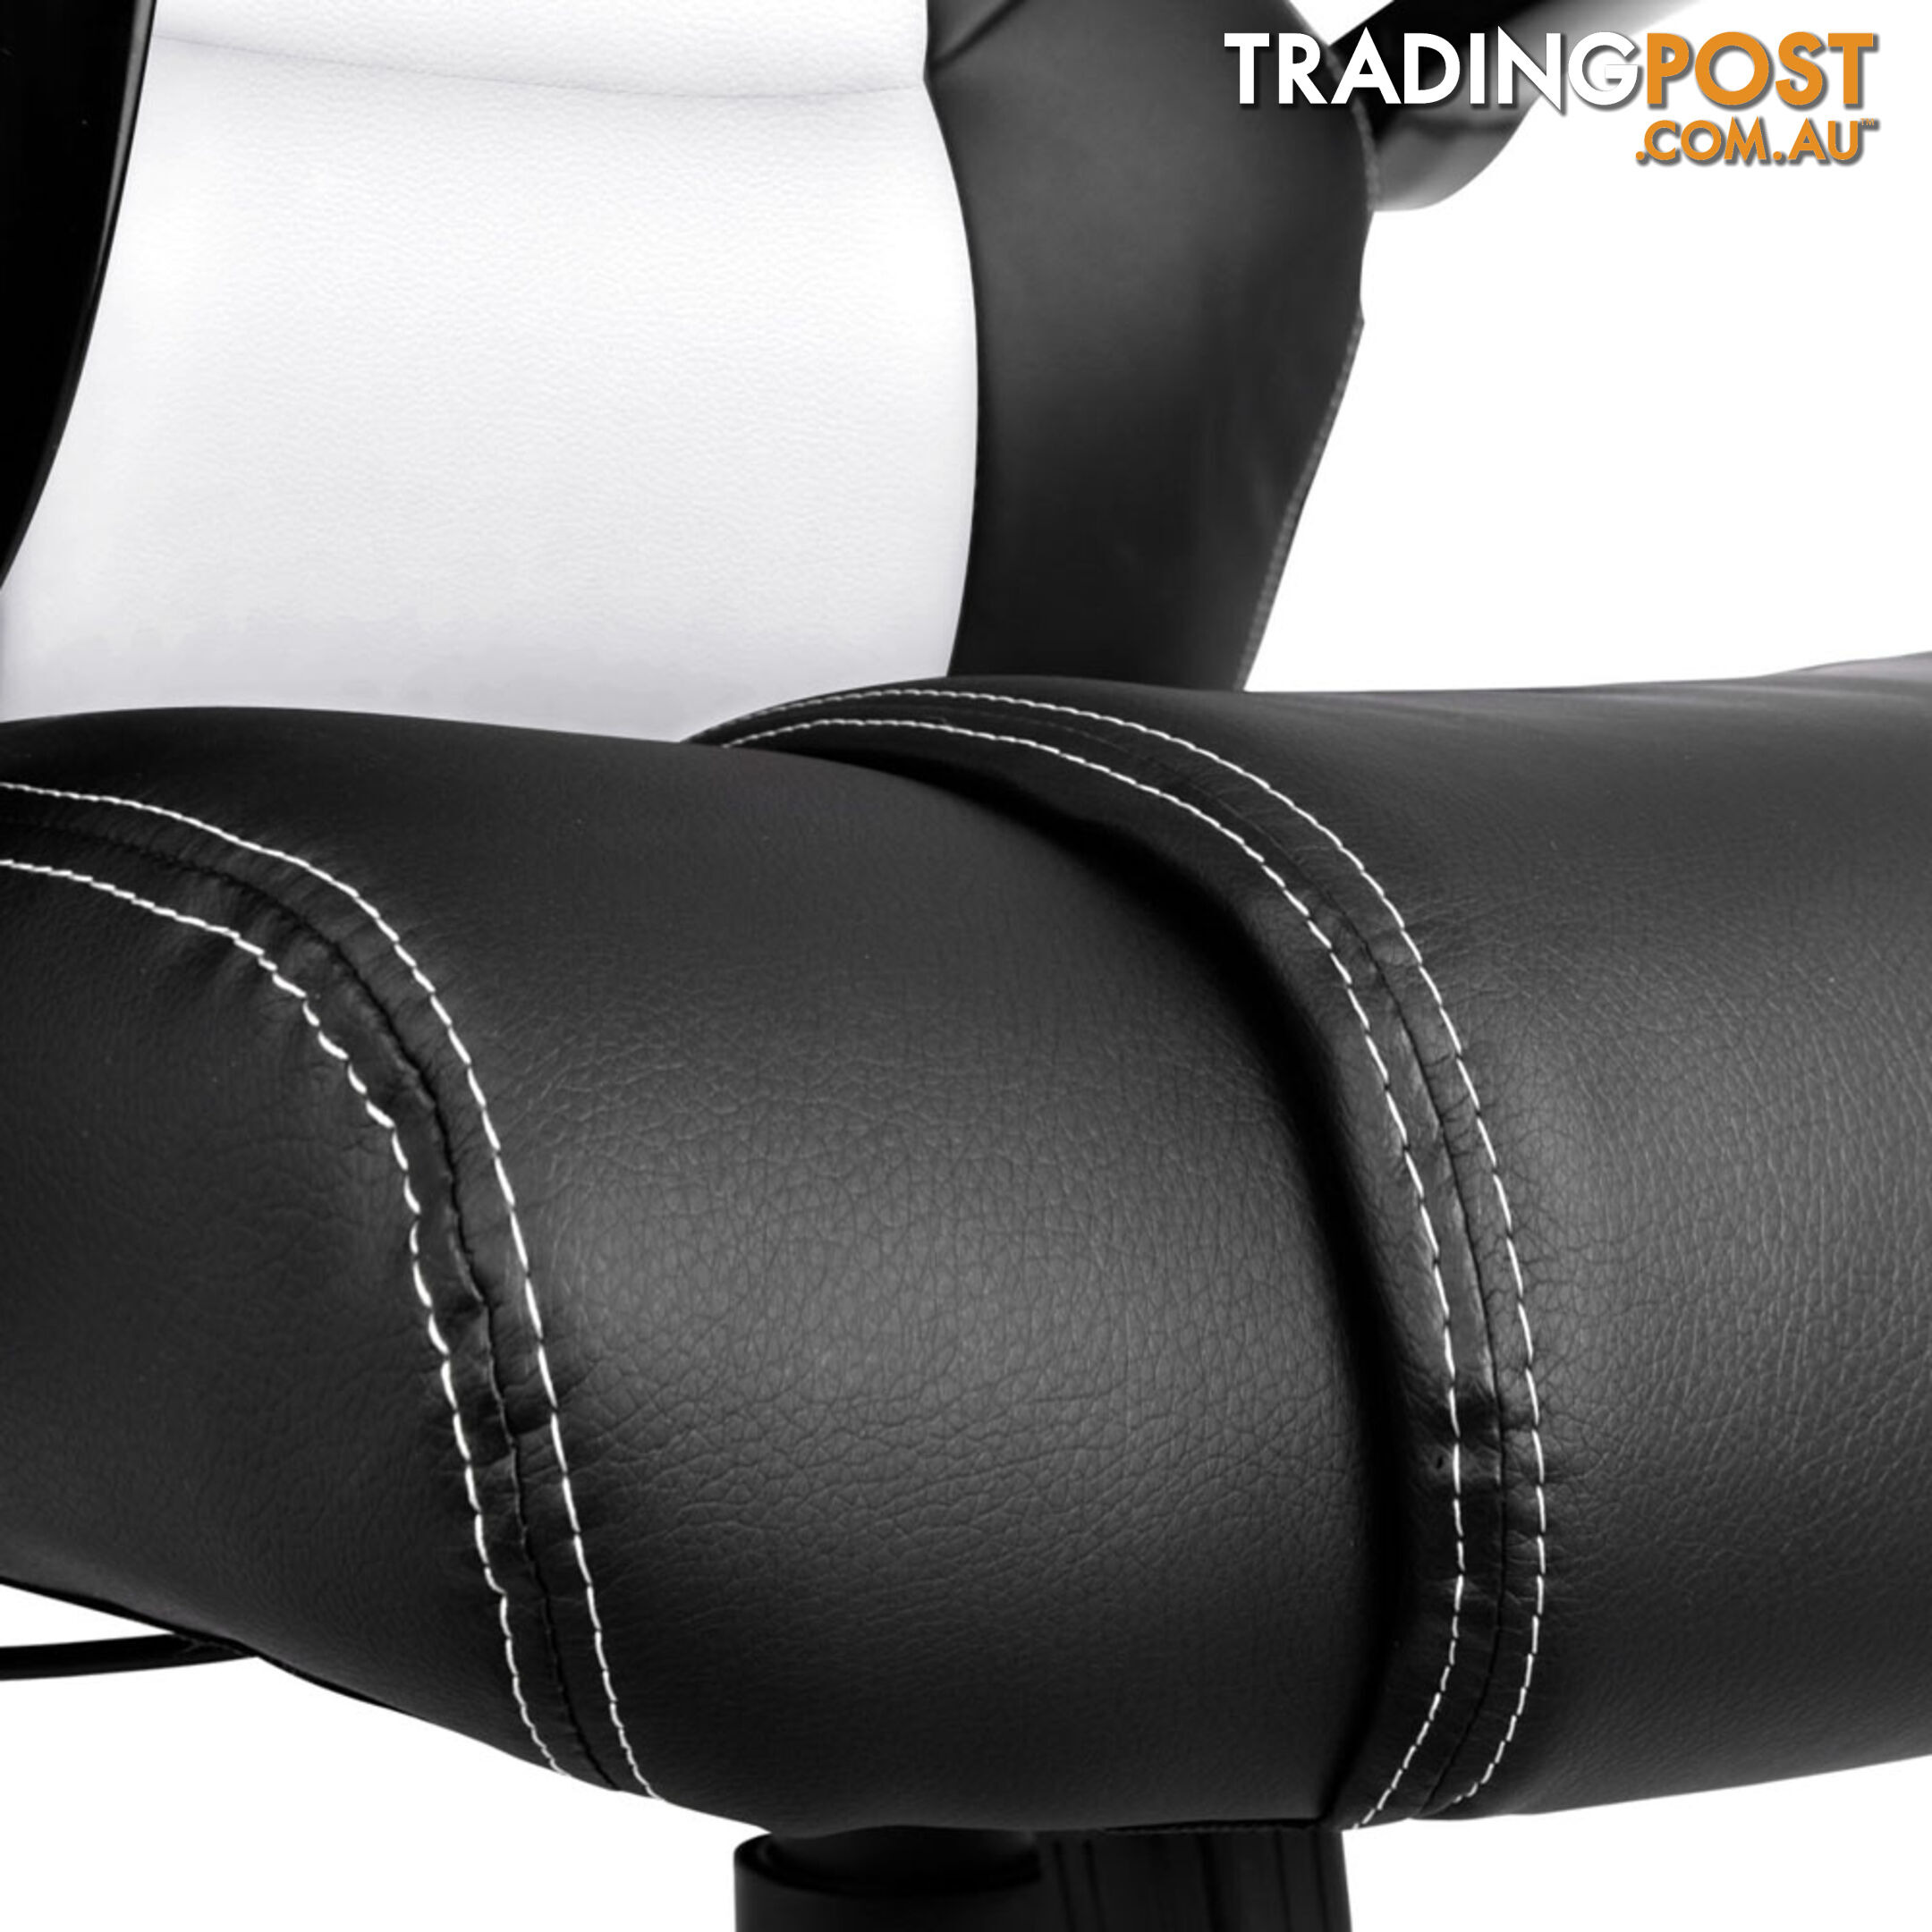 Executive PU Leather Office Computer Chair Black White